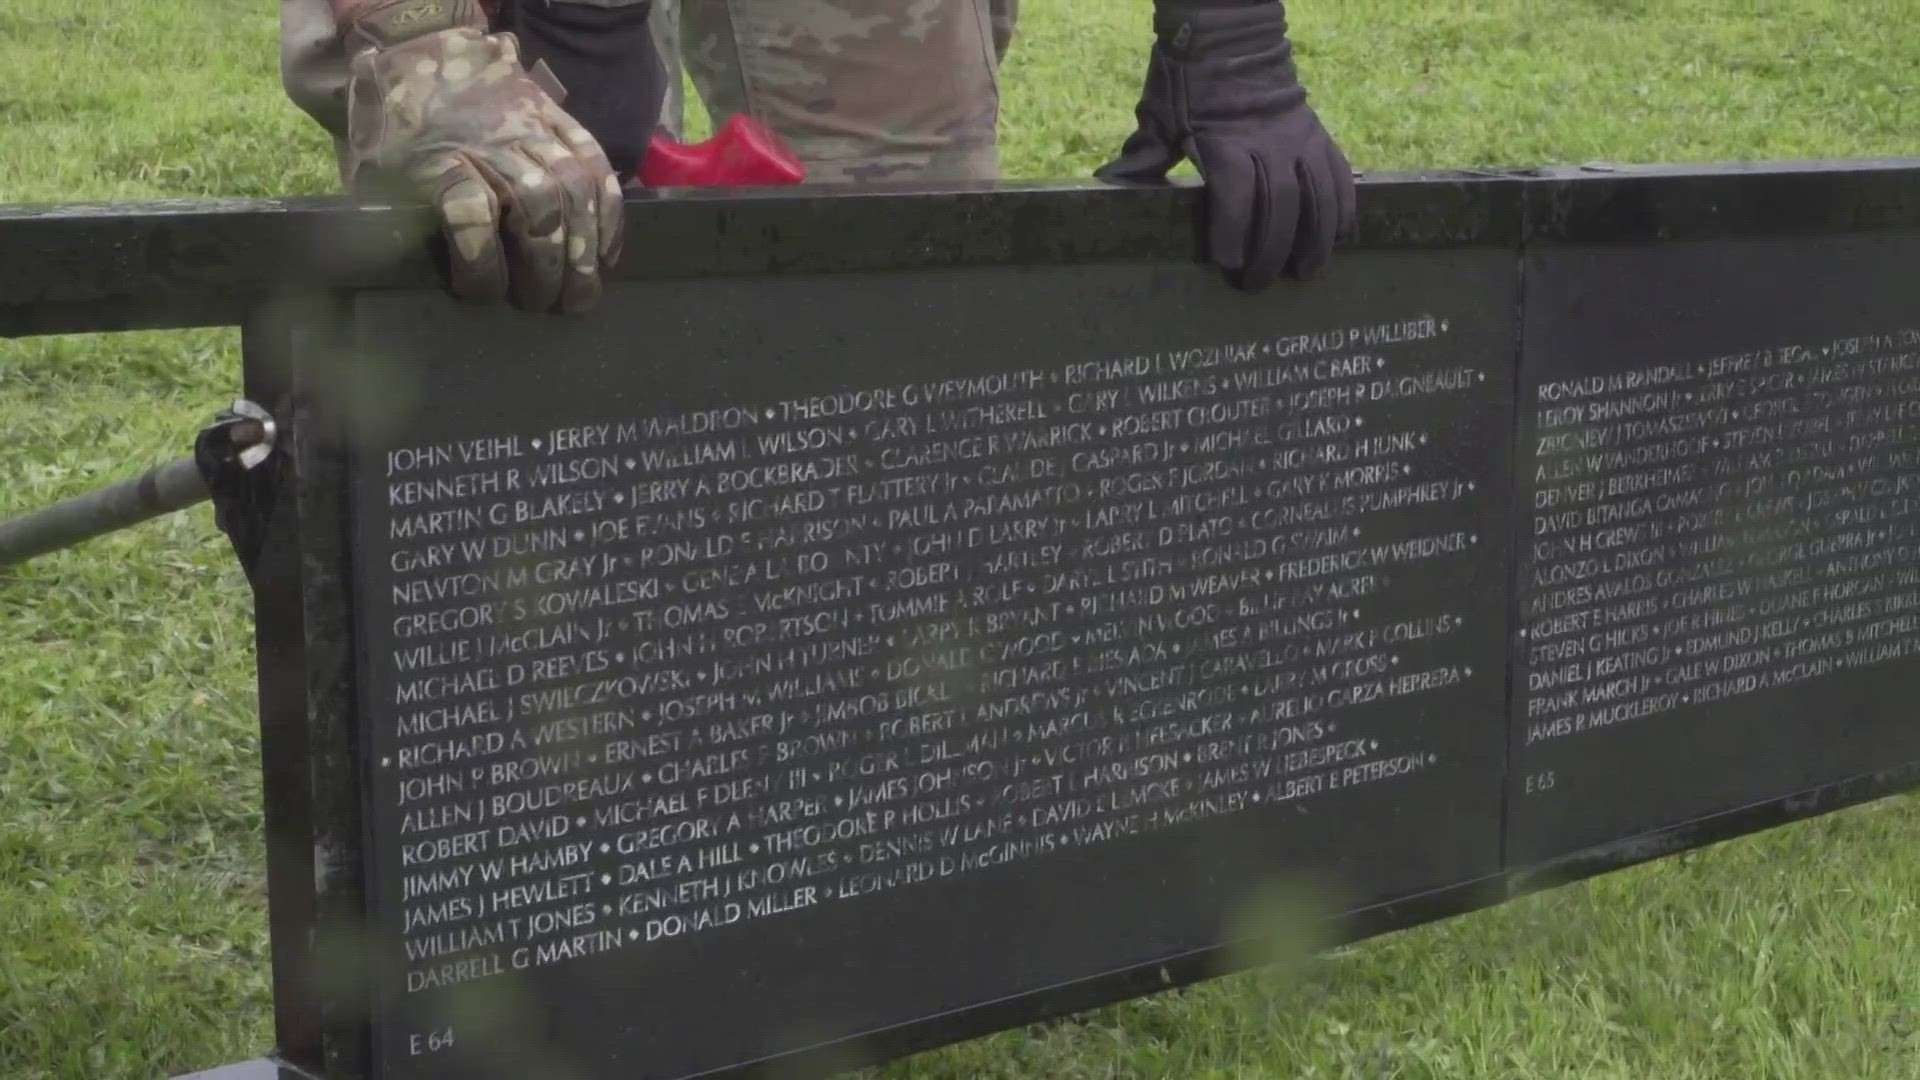 The Wall that Heals is a three-quarter replica of the Vietnam Veterans Memorial in Washington D.C. It's making a stop in Citrus Heights for its national tour.